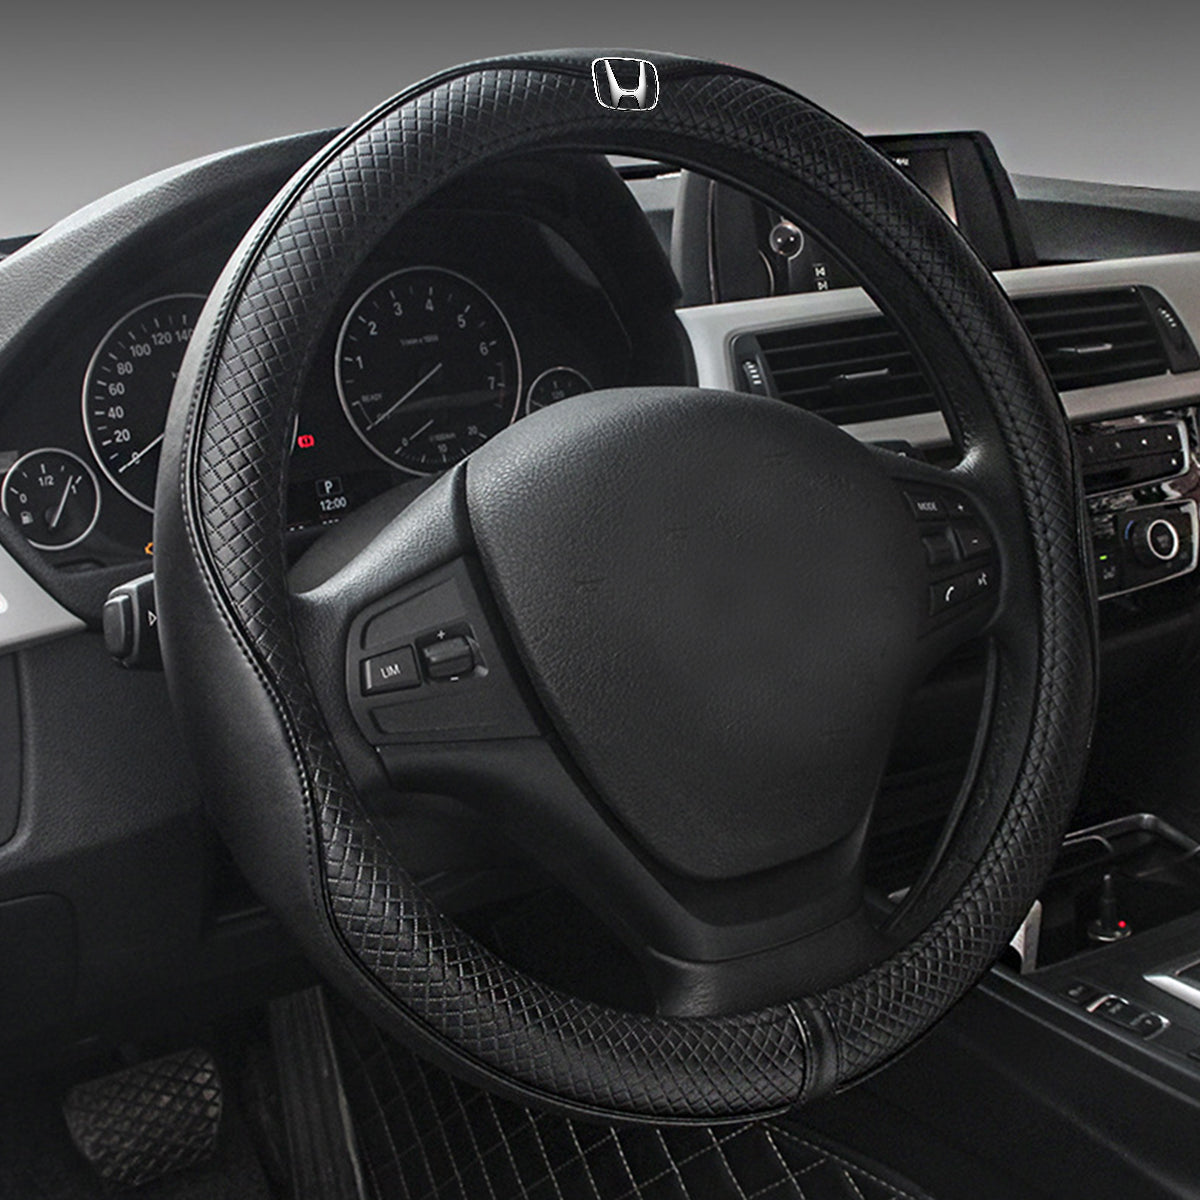 Enhance Your Ride with a Stylish Honda Steering Wheel Cover